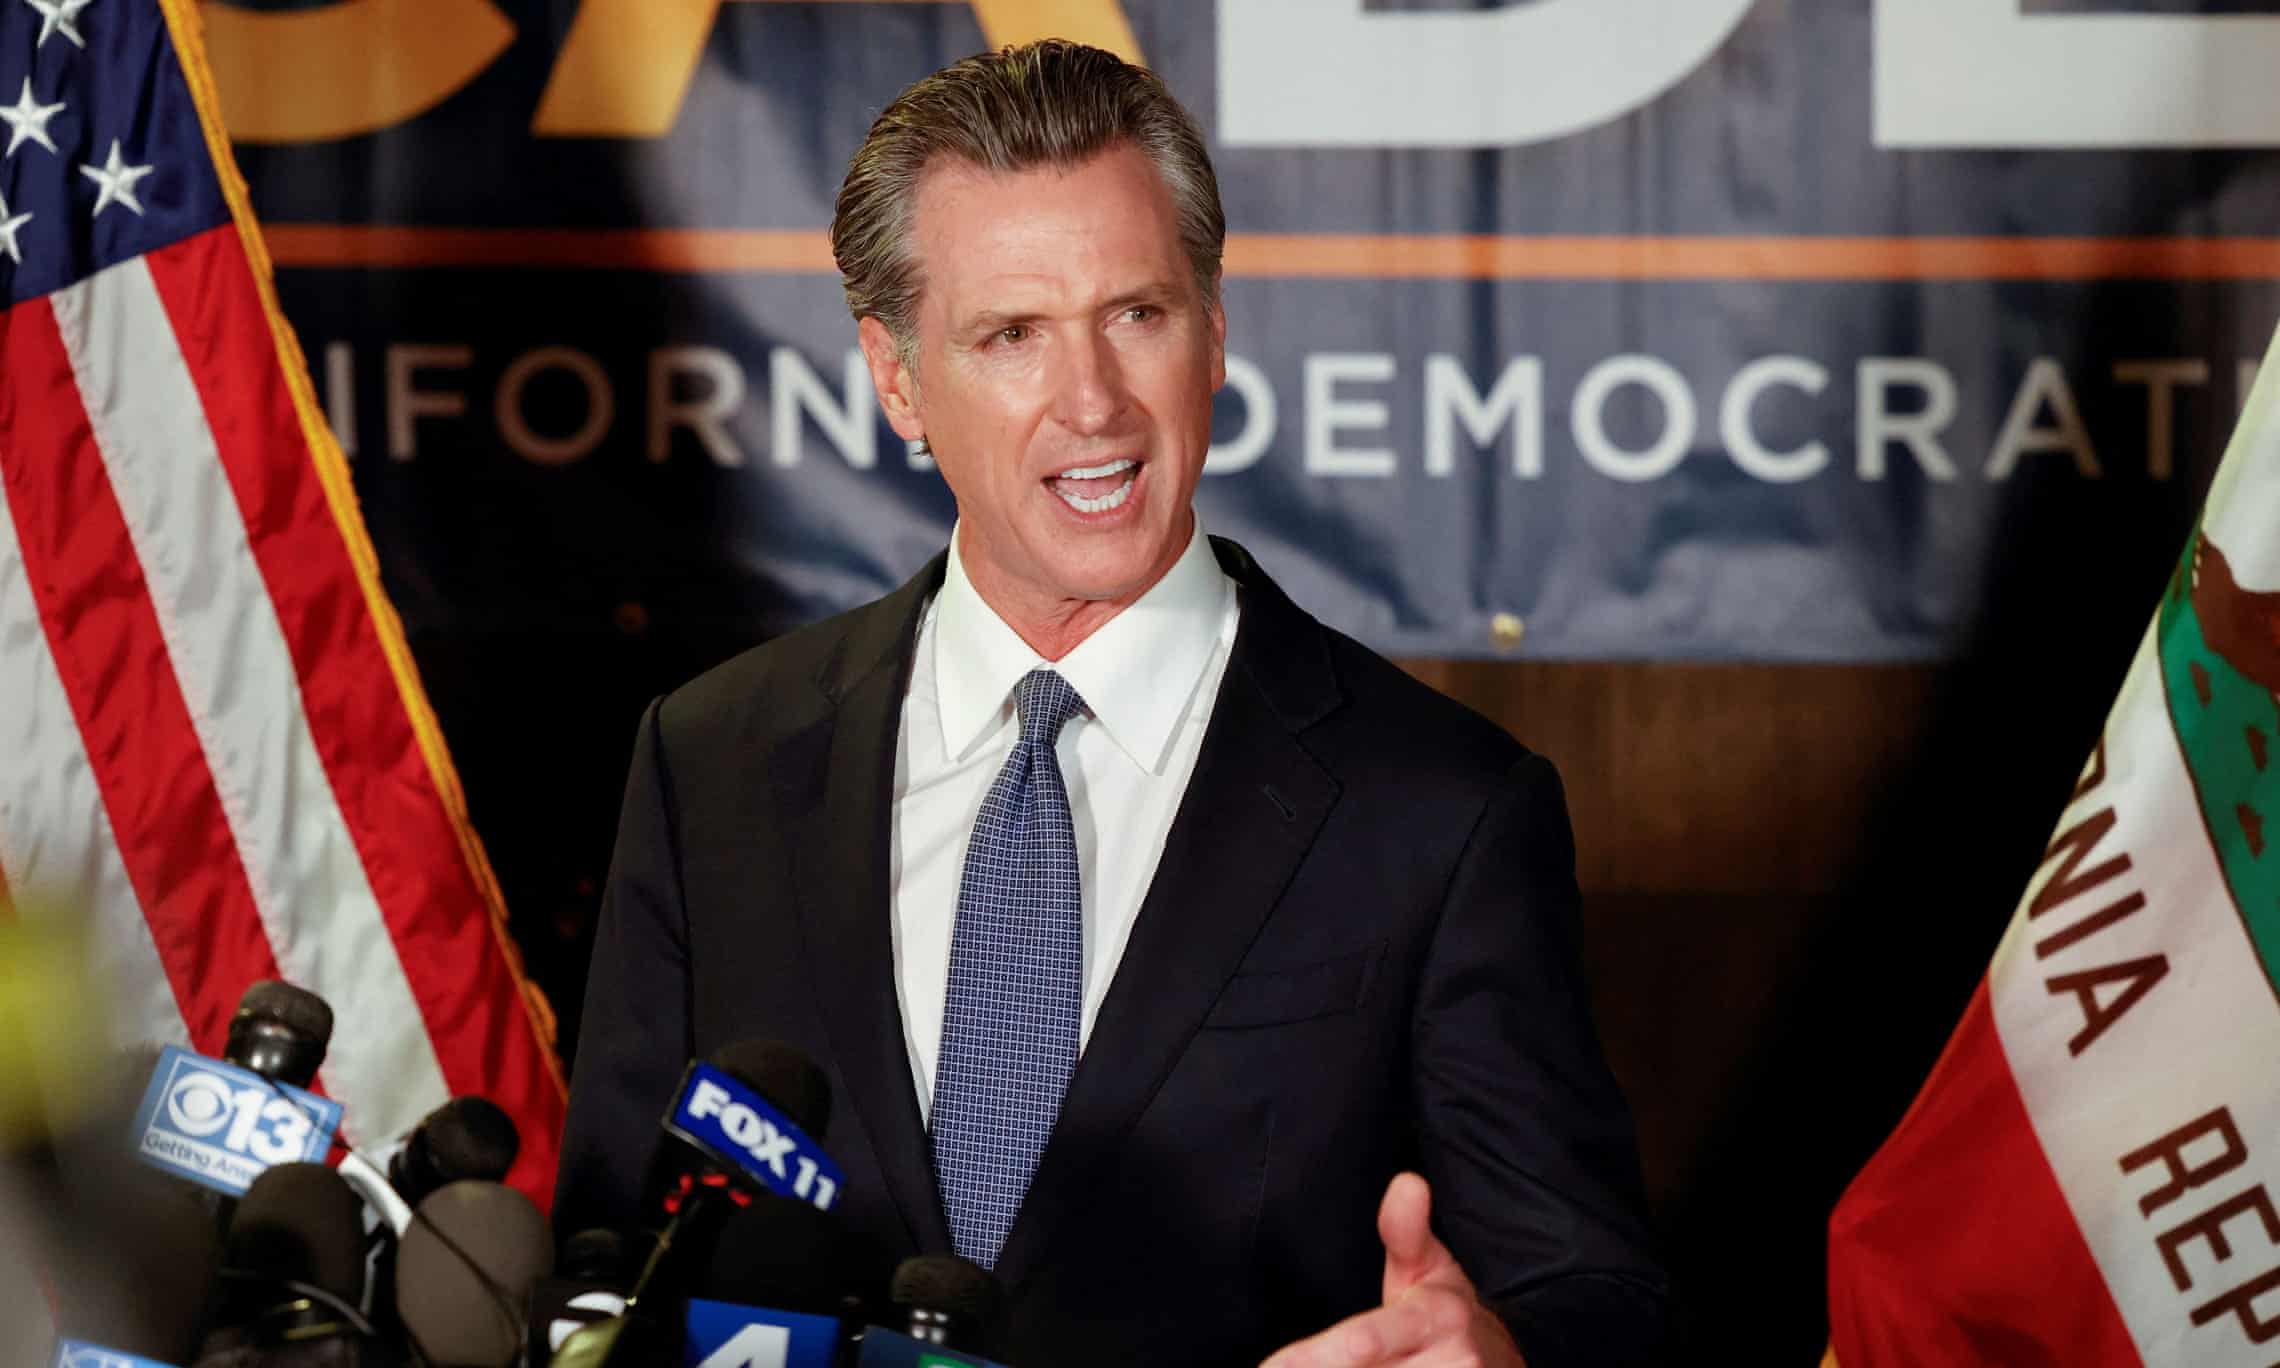 Will Gavin Newsom run for president – and could he win over the Democratic base? (theguardian.com)